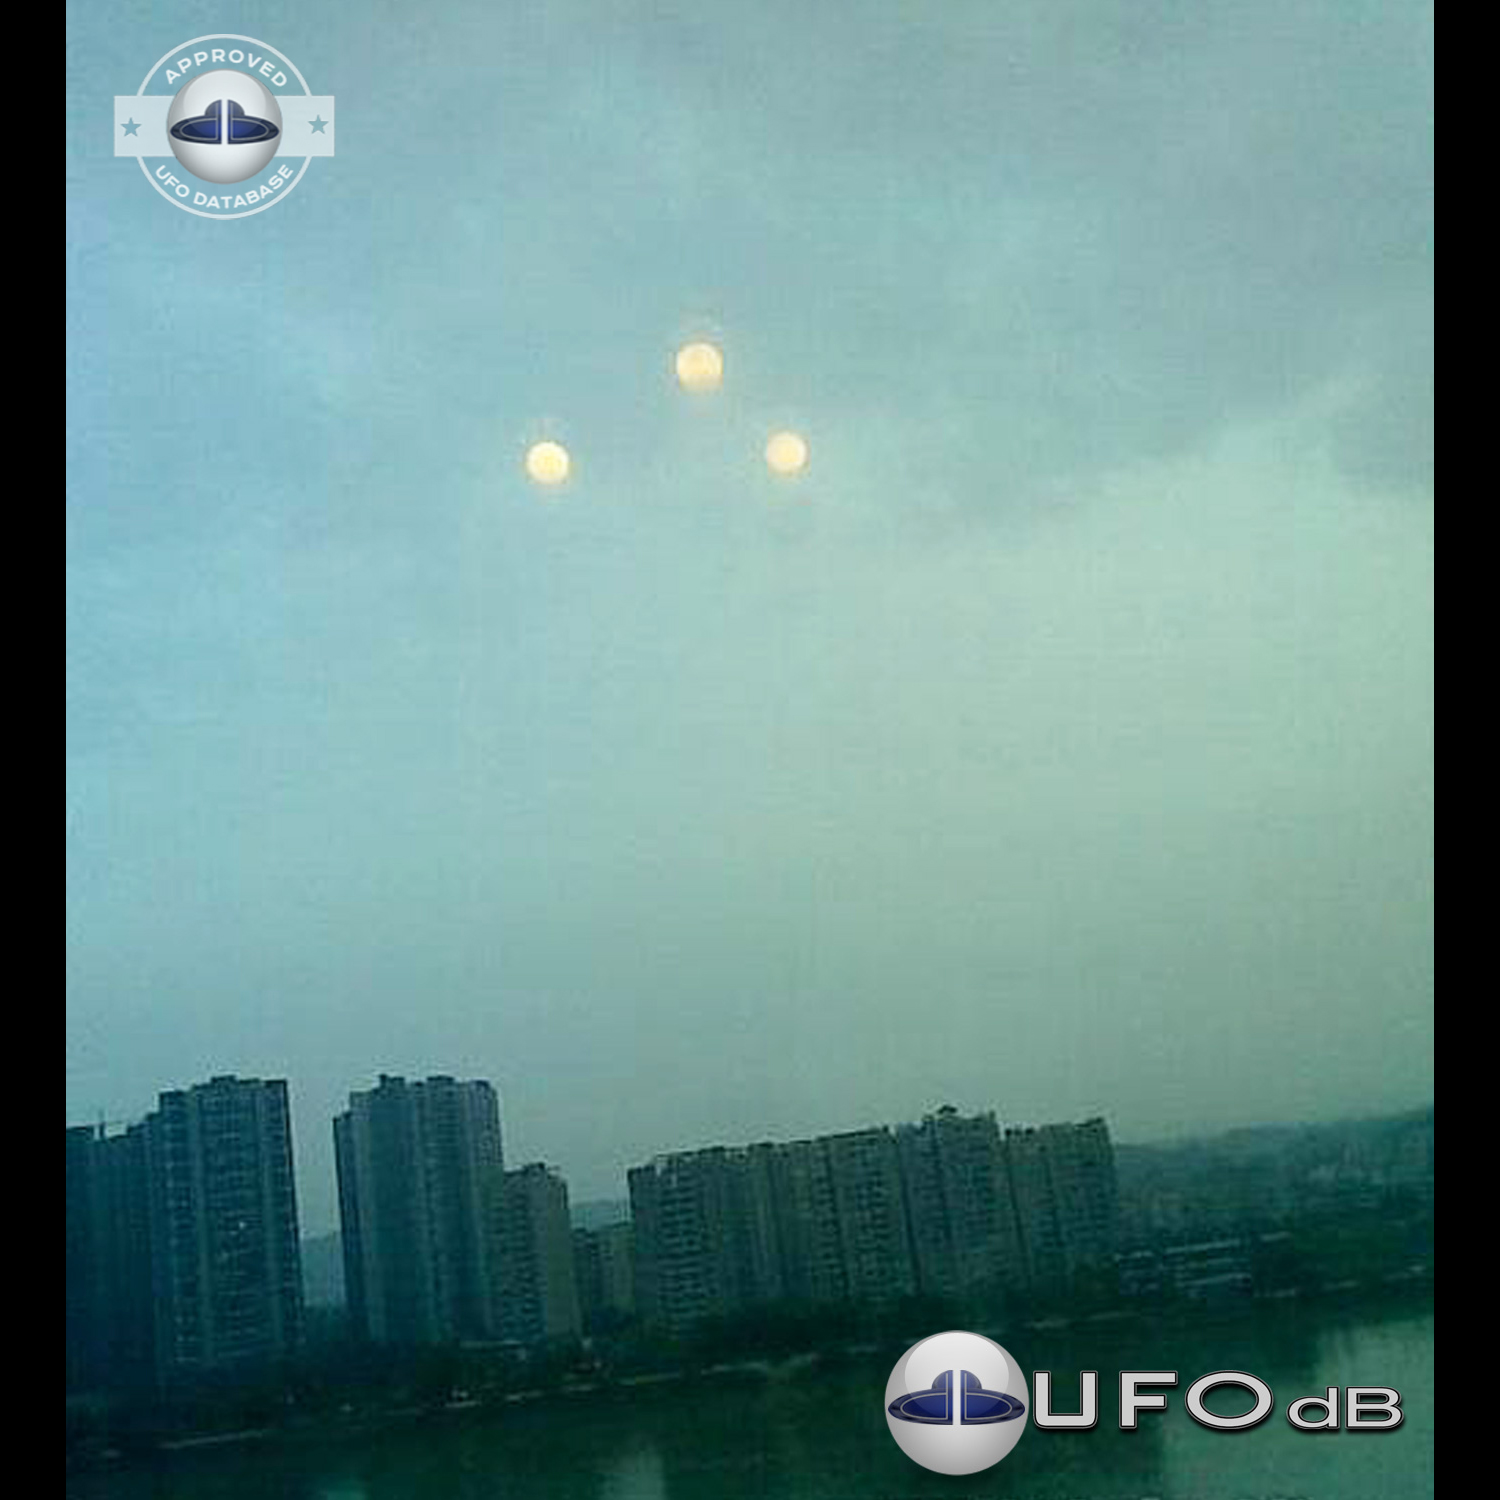 Citizens of Leshan saw 3 illuminated spherical shaped UFO in the sky UFO Picture #158-1